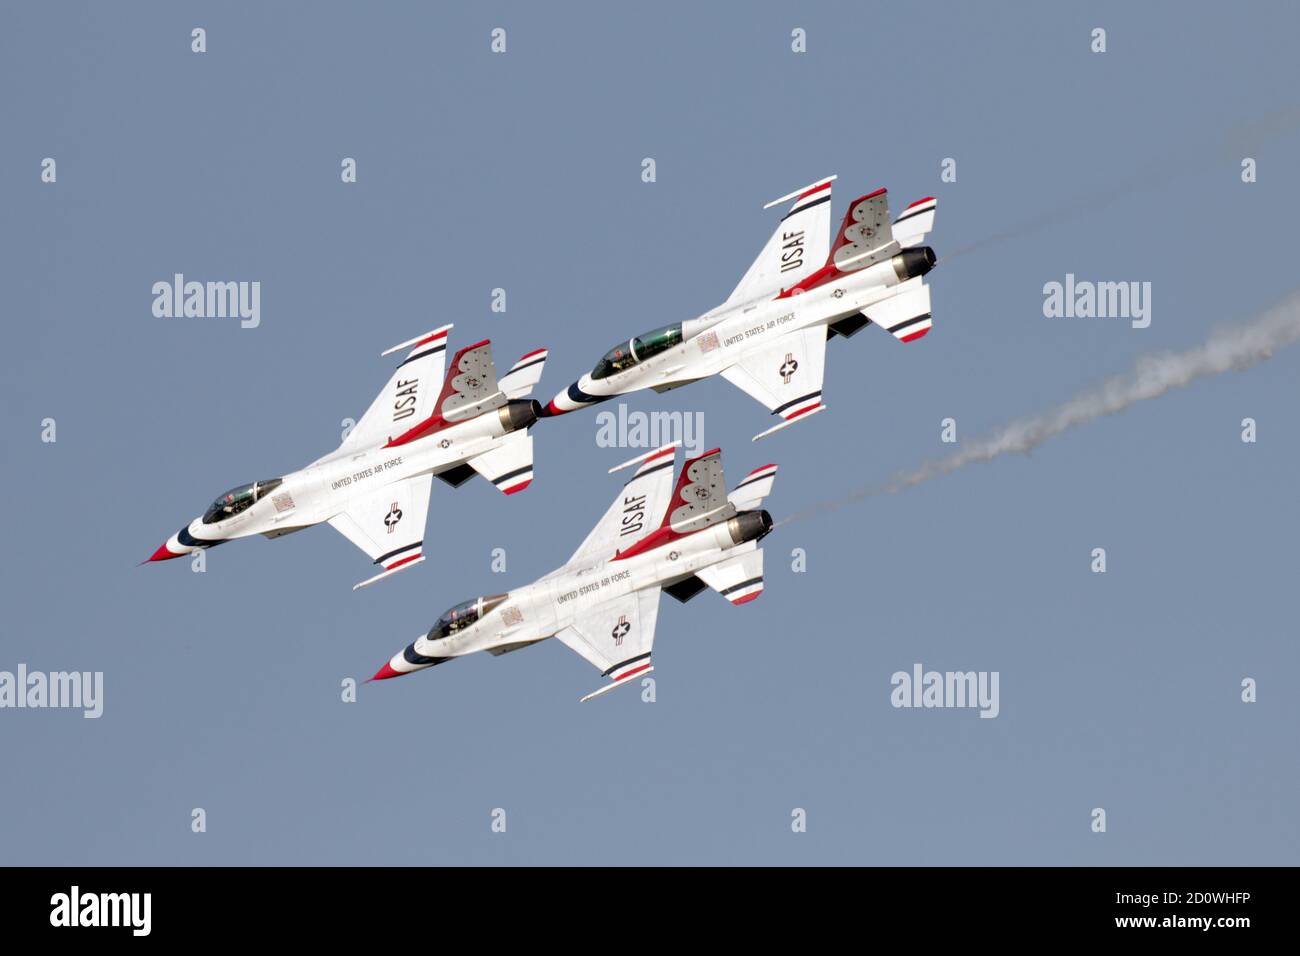 Three plane formation of the United States Air Force Thunderbirds (USAF) participating in Airshow London 2020 Skydrive located in Ontario Canada Stock Photo